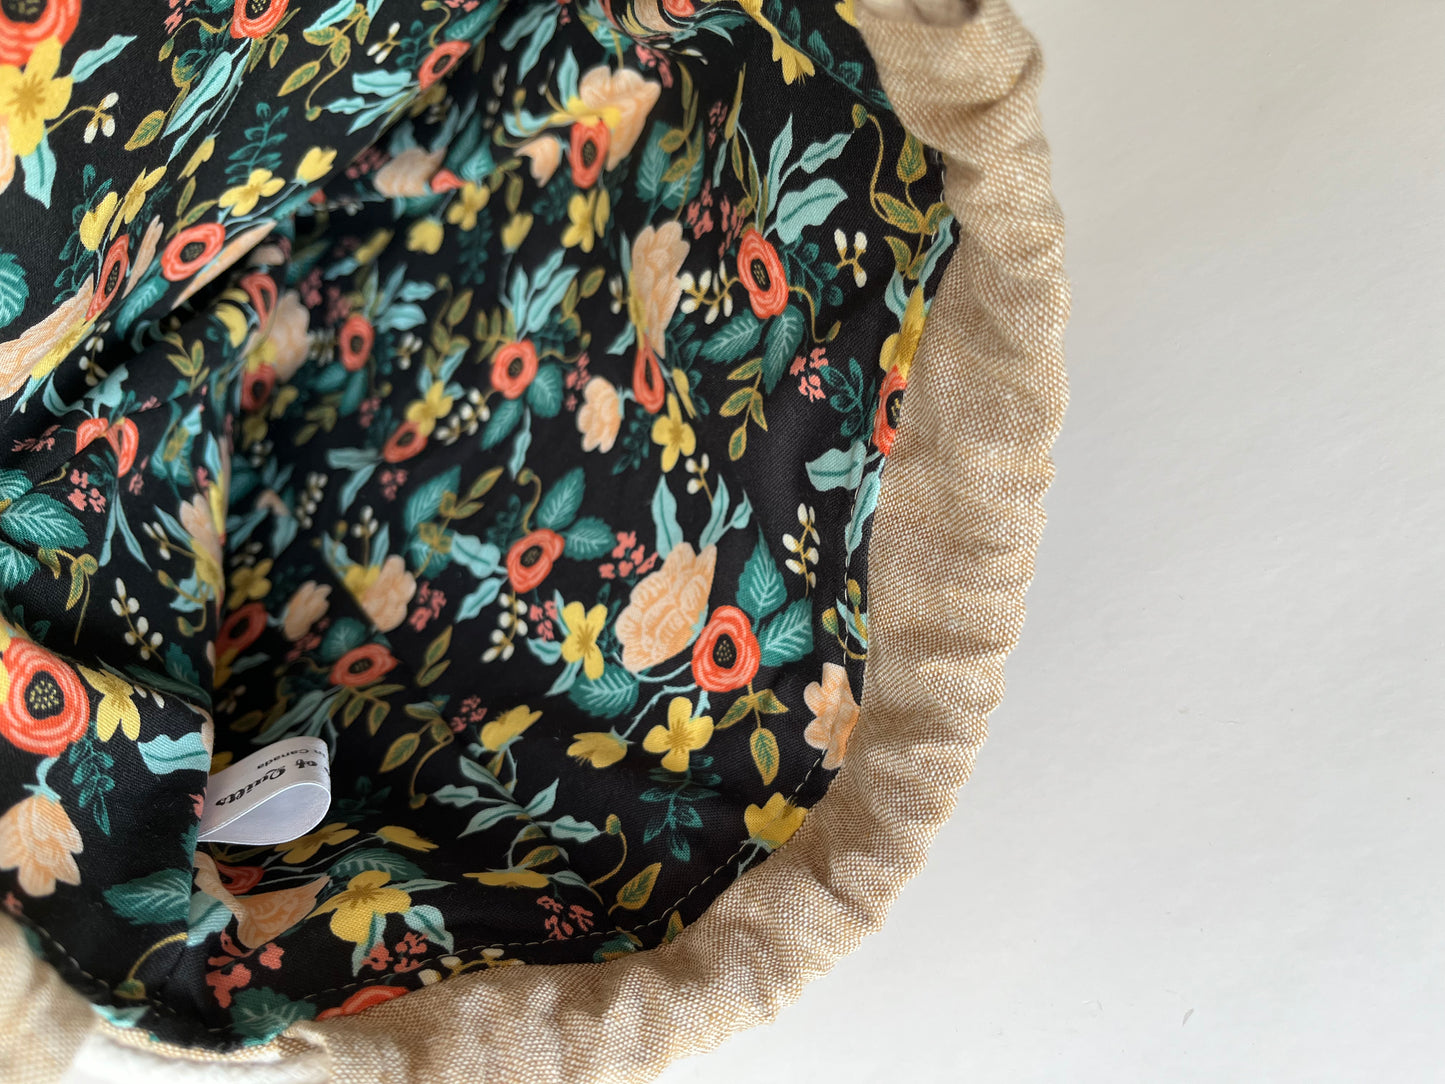 Beige Linen and Rifle Paper Co Floral Knitting Project Bag